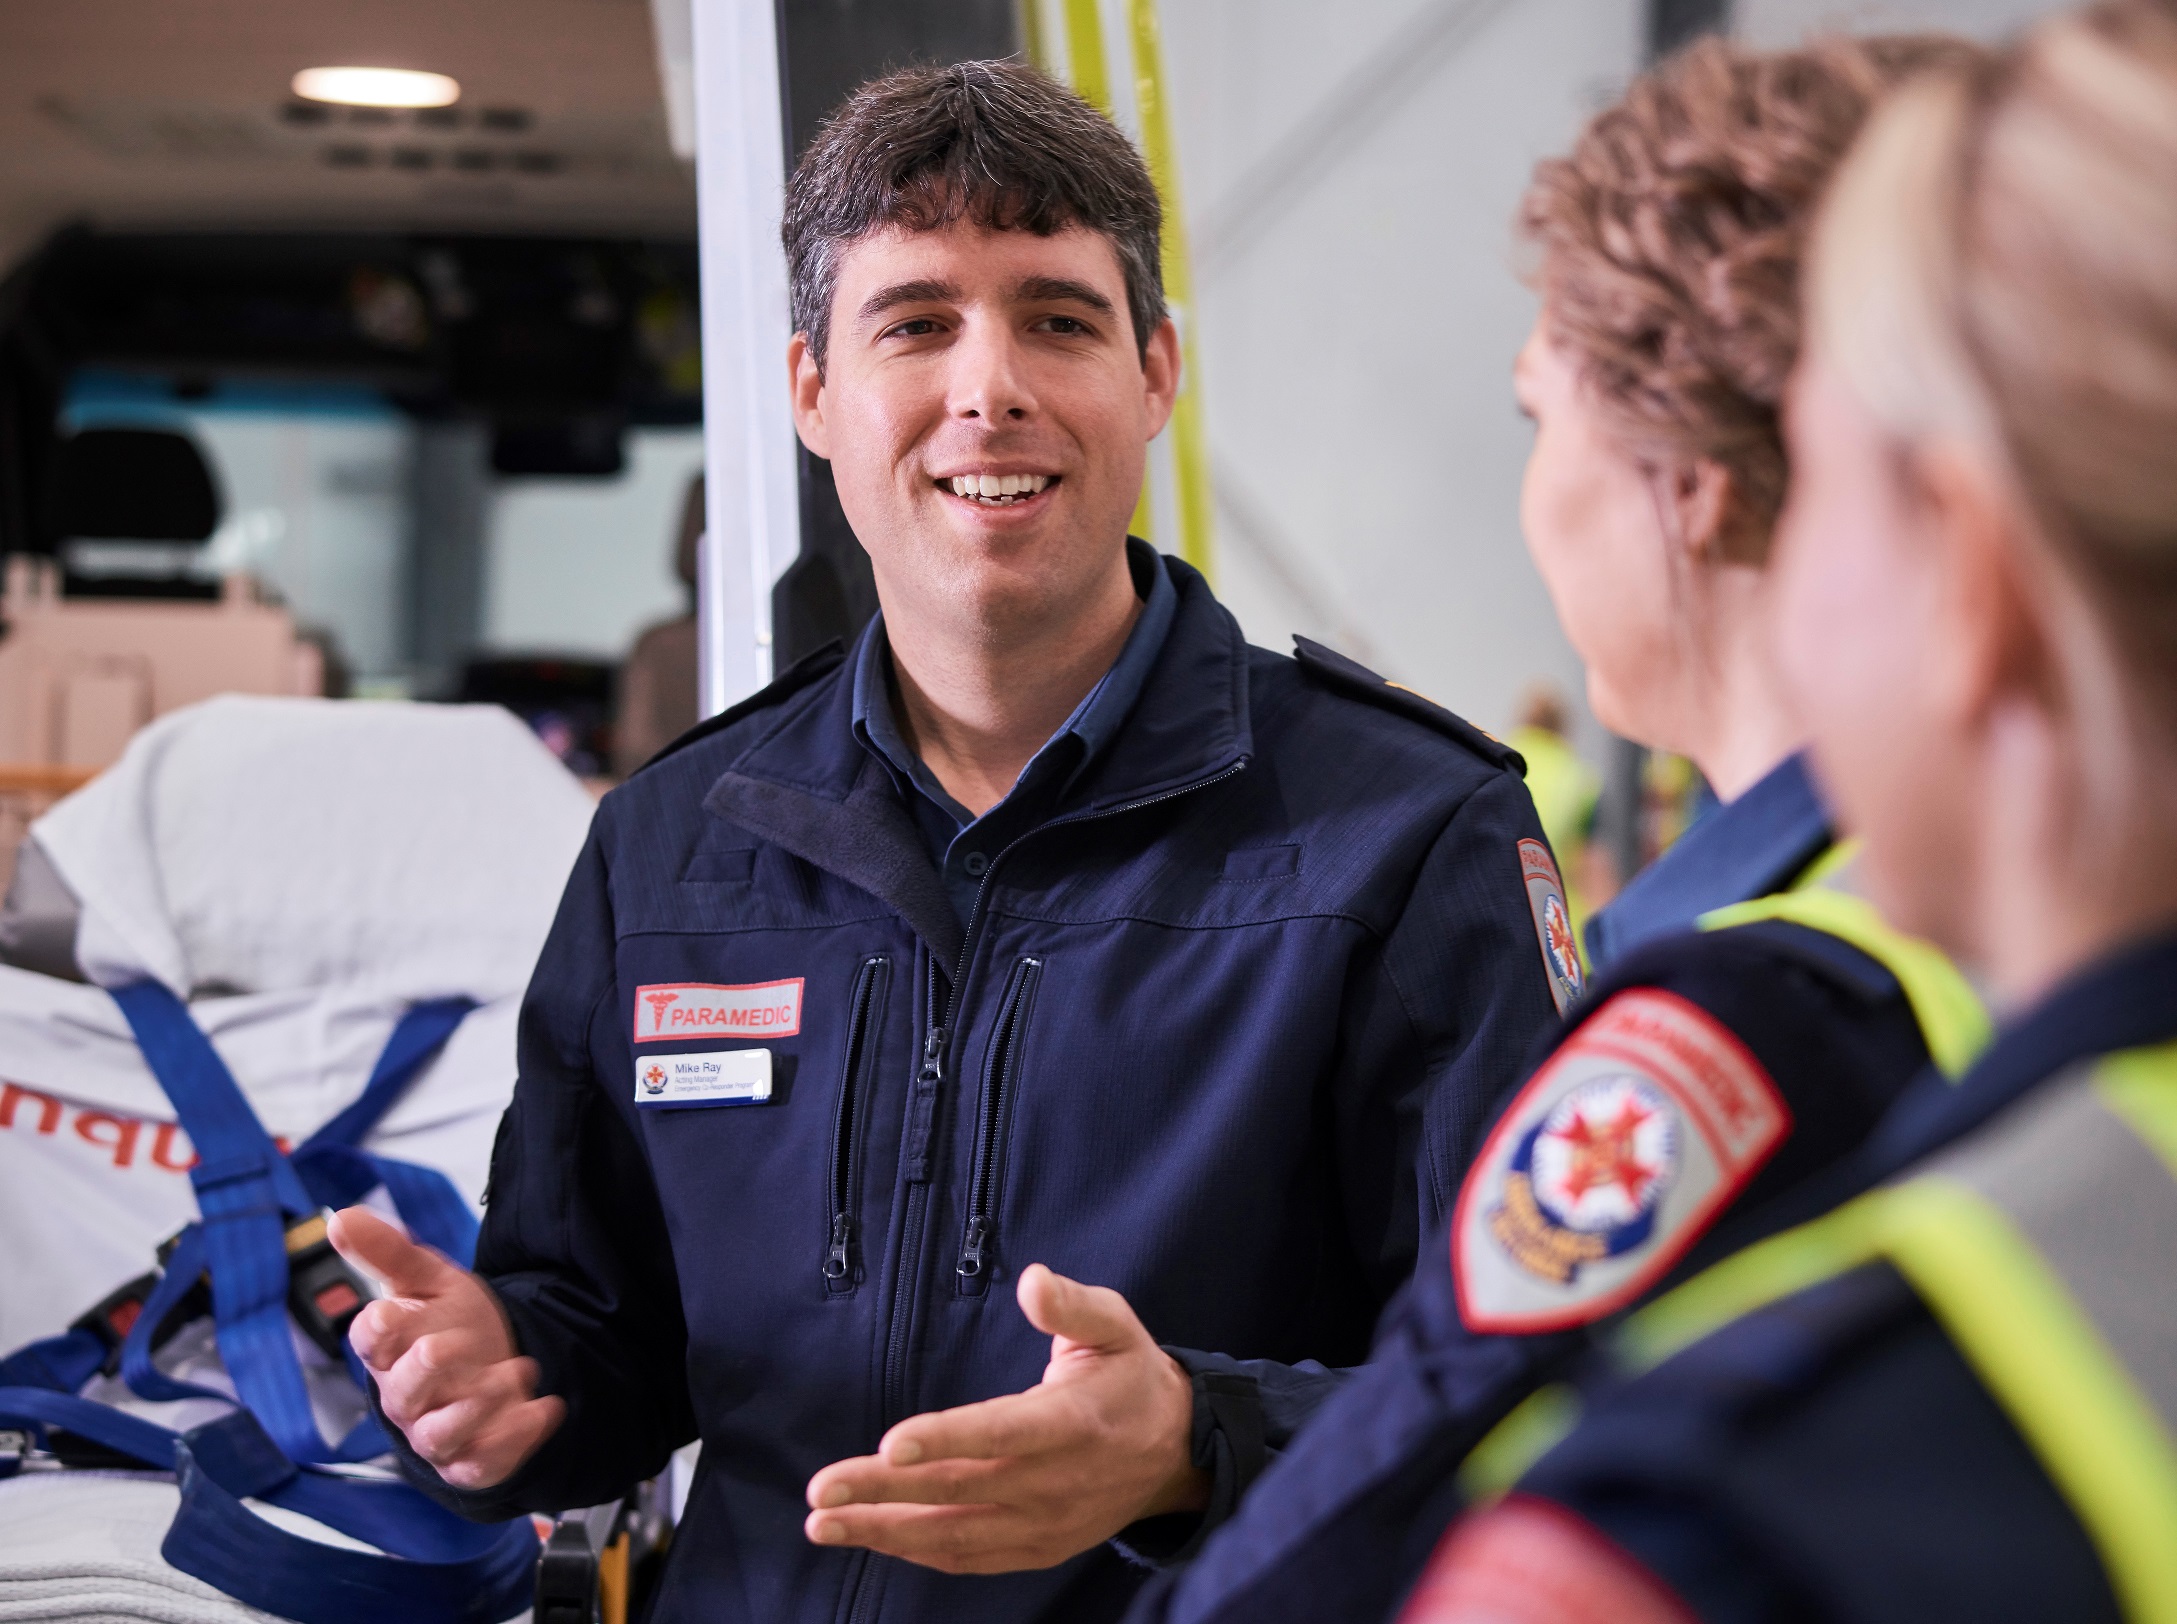 Mike Ray leads Ambulance Victoria's partnership with GoodSAM to help save more lives from sudden cardiac arrest.